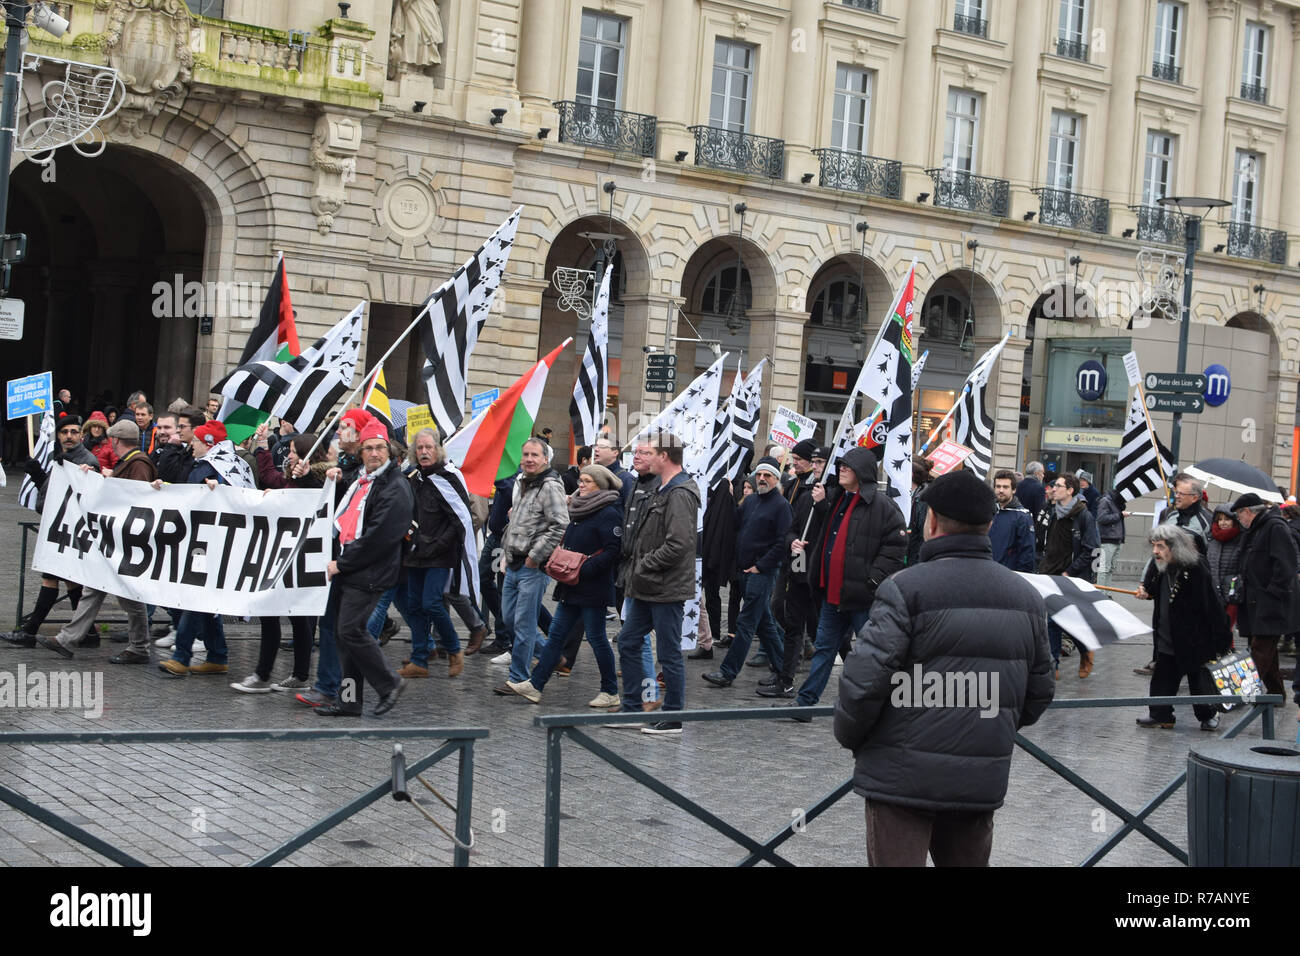 Renne, France. 8th Dec 2018. Participants in a peaceful demonstration in Rennes, Brittany, France on 8 December, 2018. Credit: Deborah Harmes/Alamy Live News Stock Photo